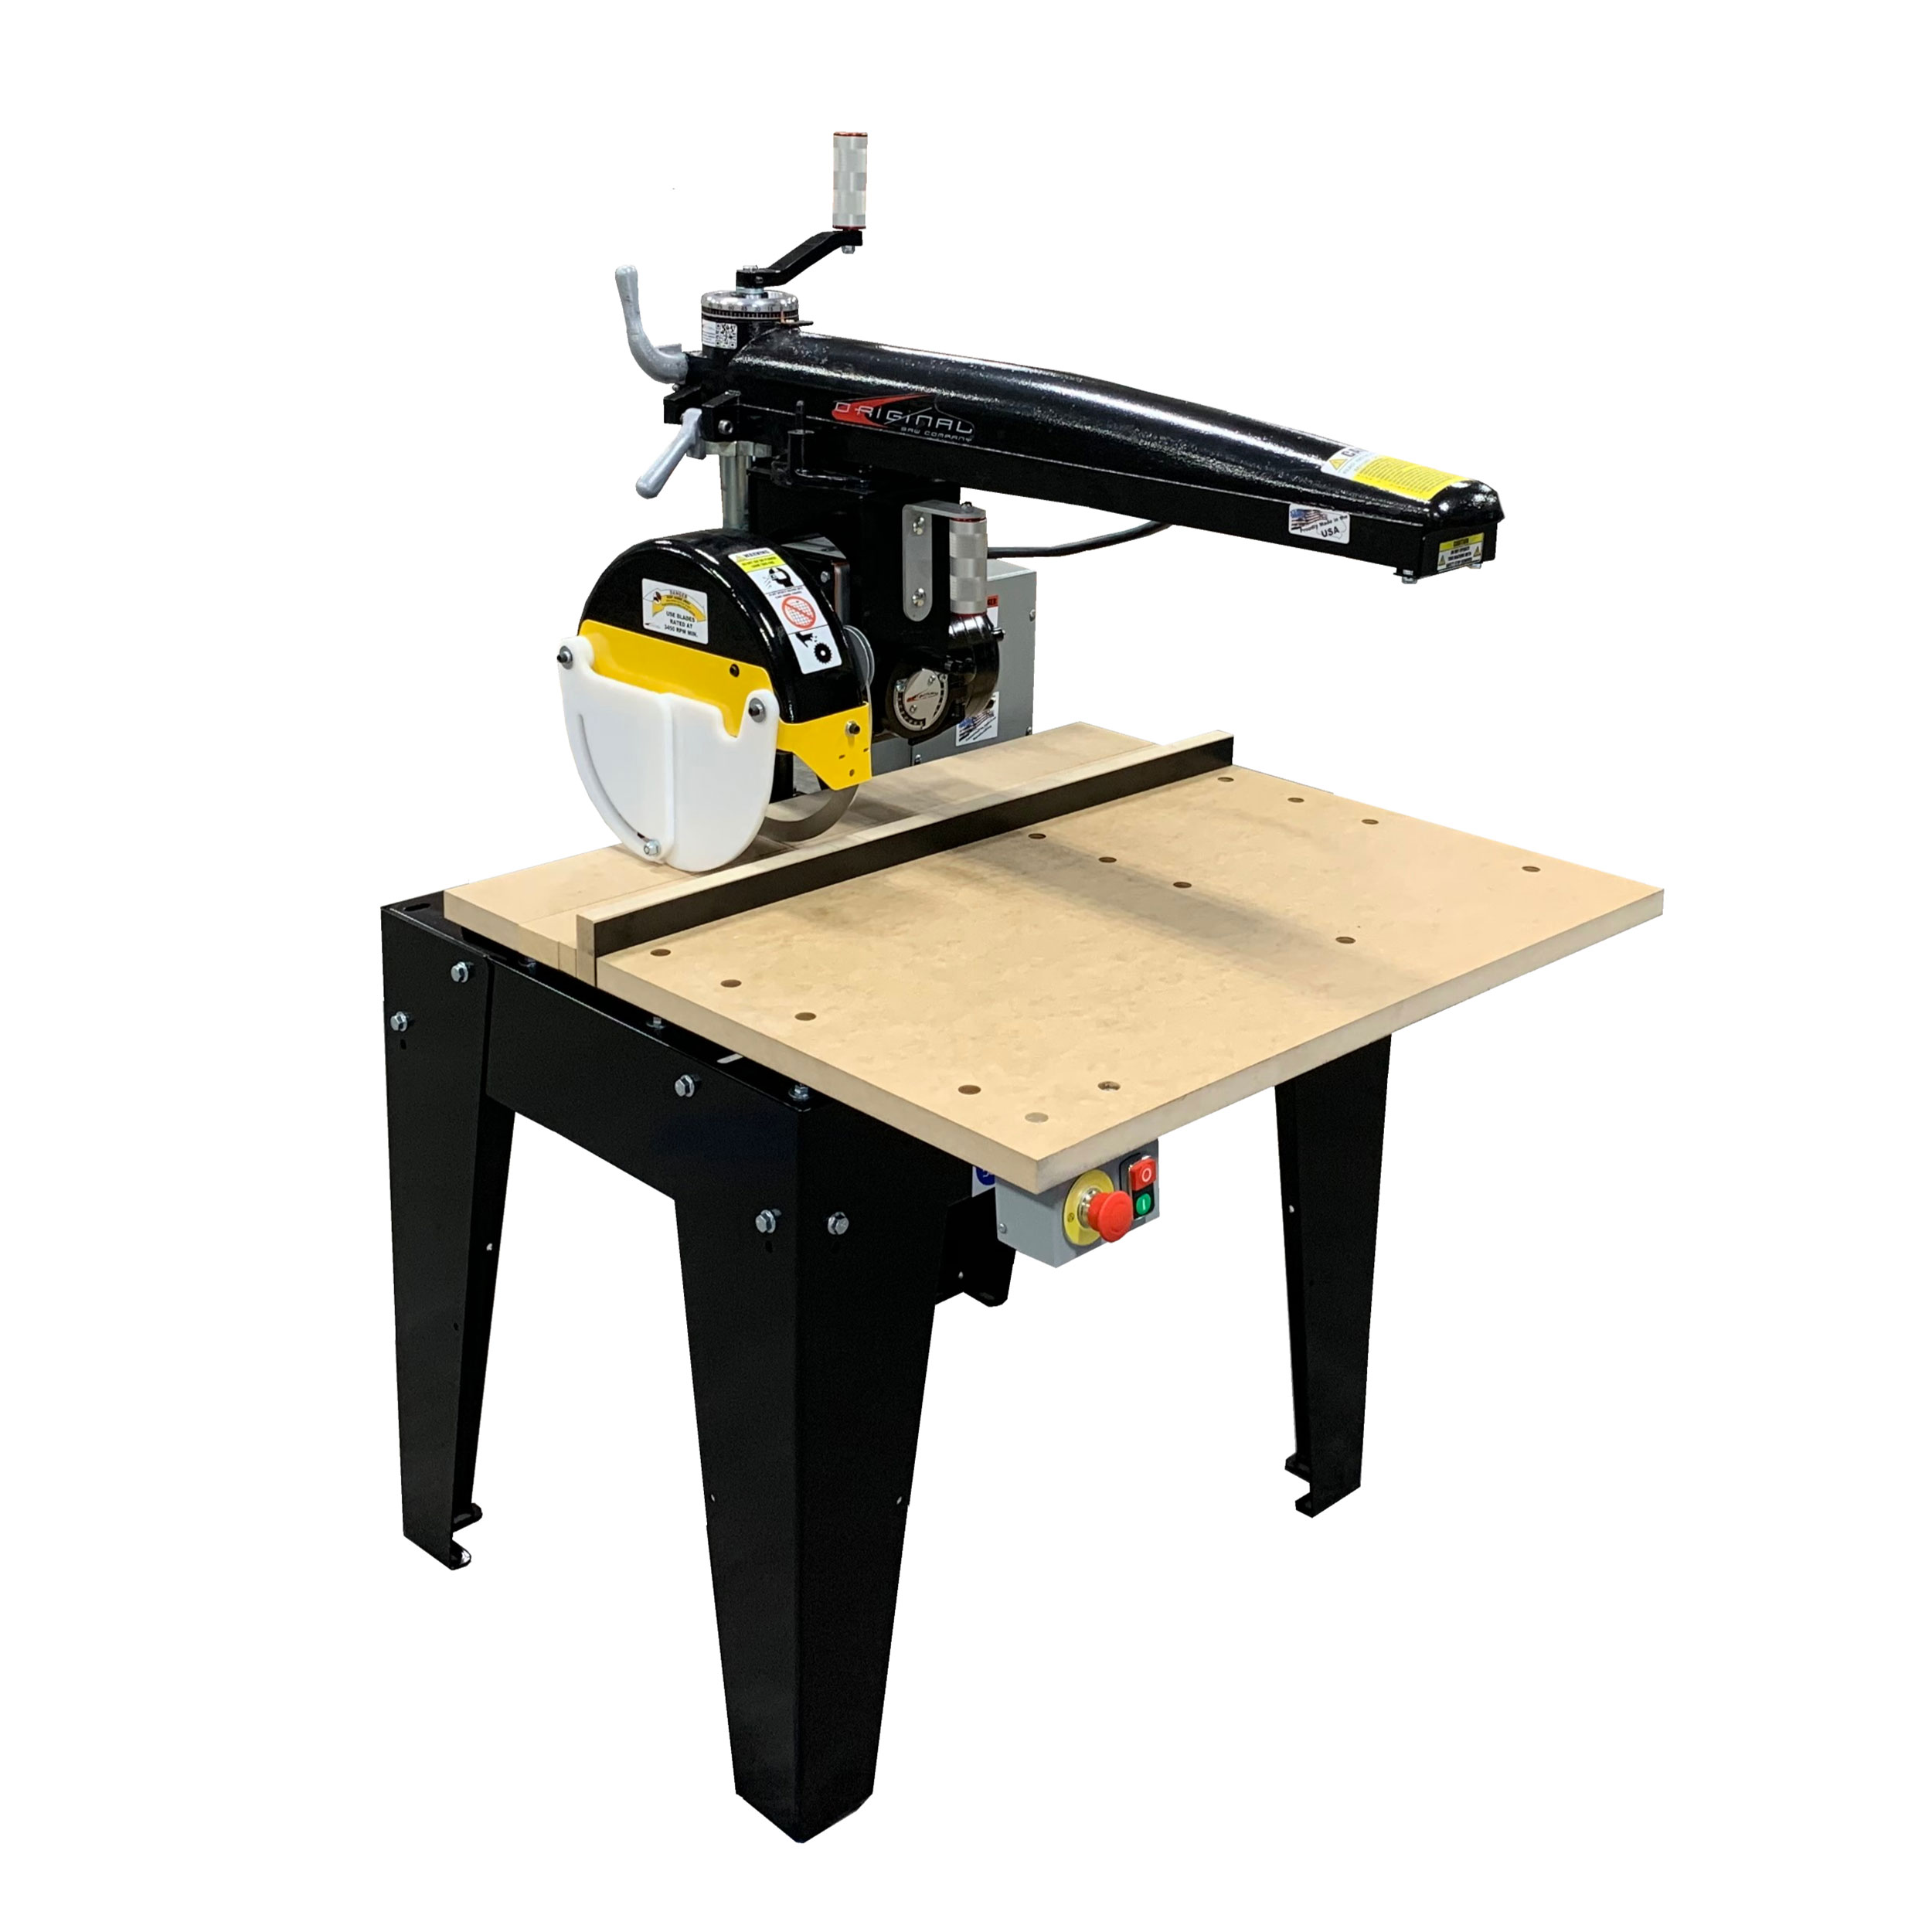 Radial Arm Saw With 12" Blade And 24" Crosscut, 3hp 1 Phase 208/230v